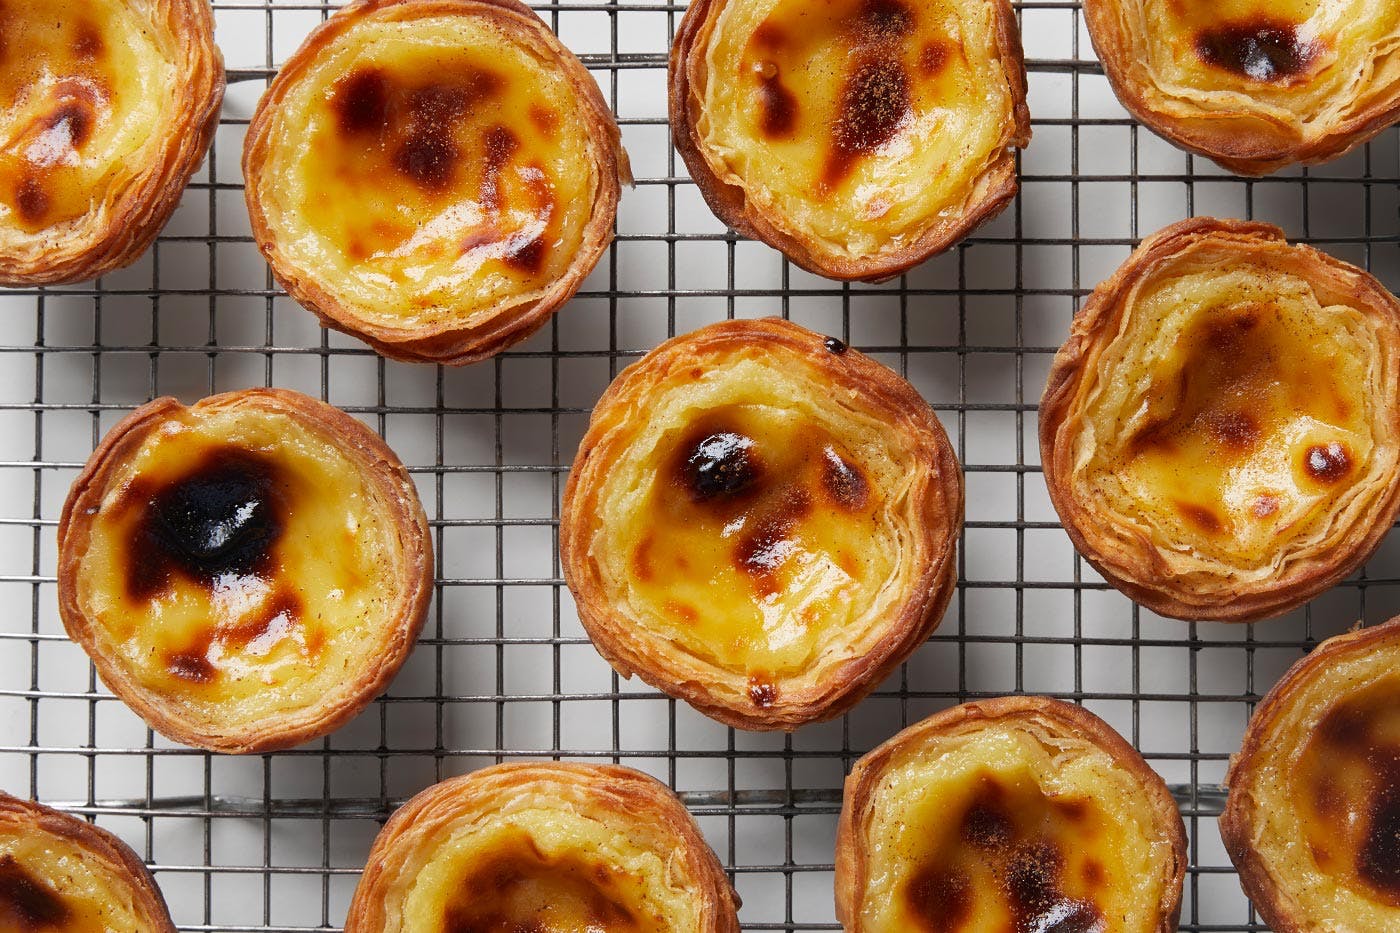 🥐 Can We Guess Your Age and Gender Based on the Pastries You’ve Eaten? Portuguese Egg Tarts